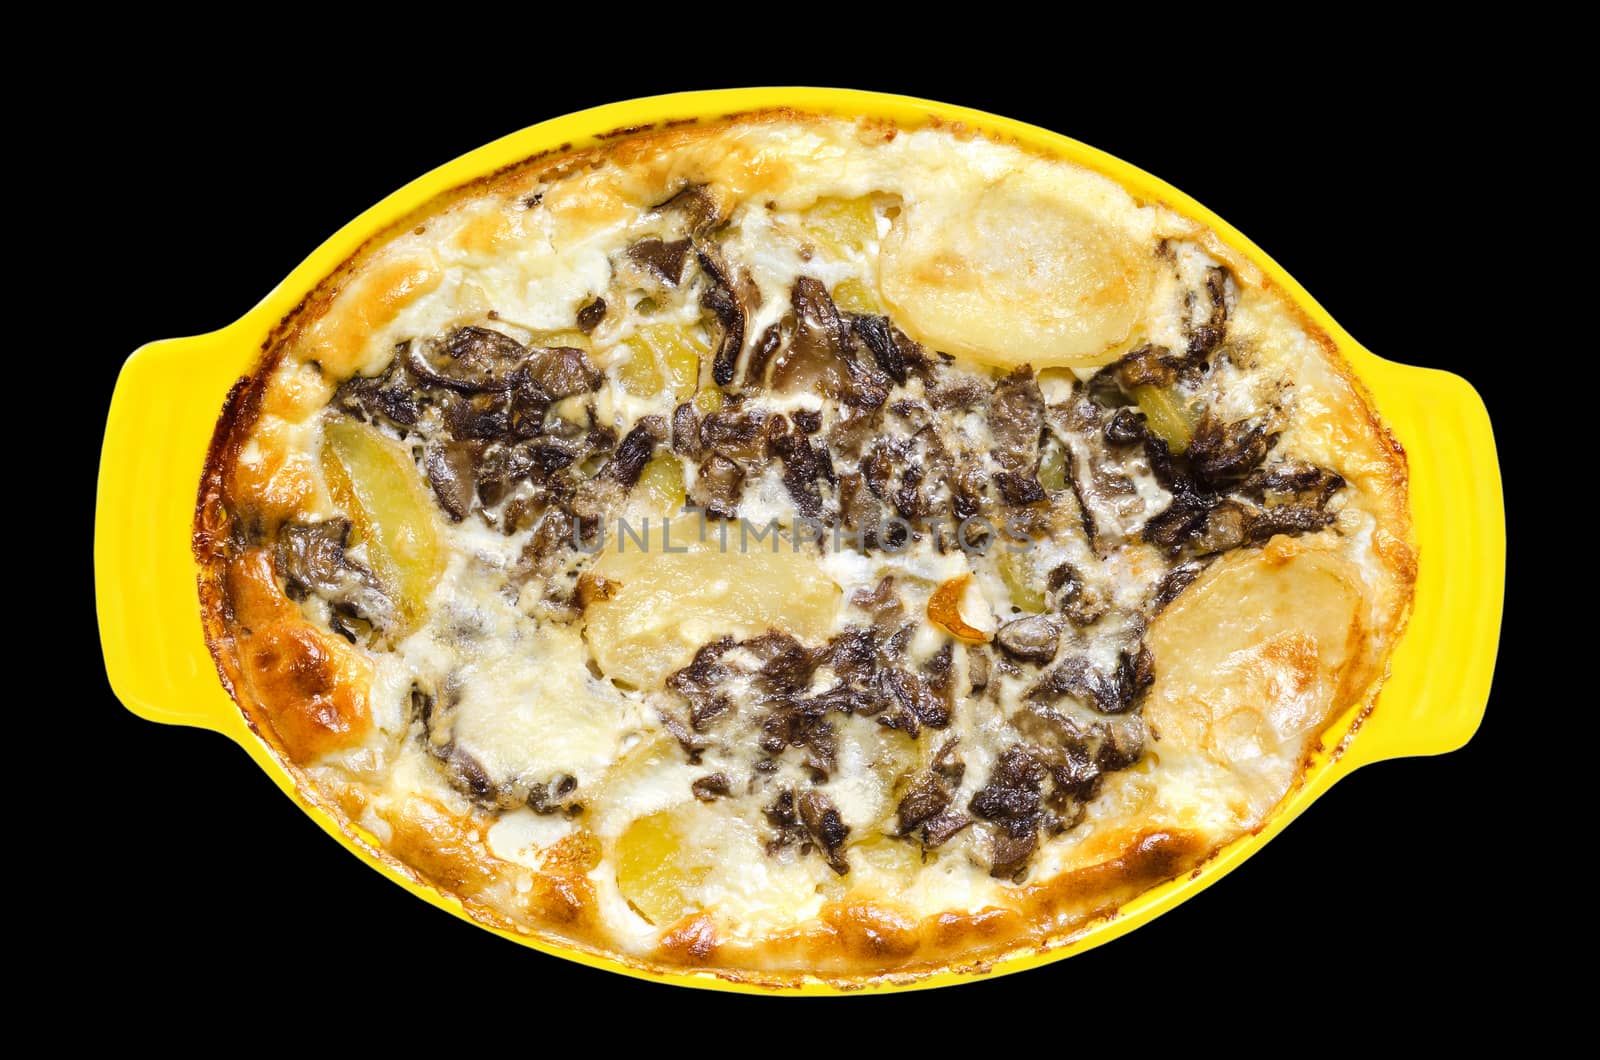 Sliced potatoes with mushrooms, baked in cream, isolated on black background